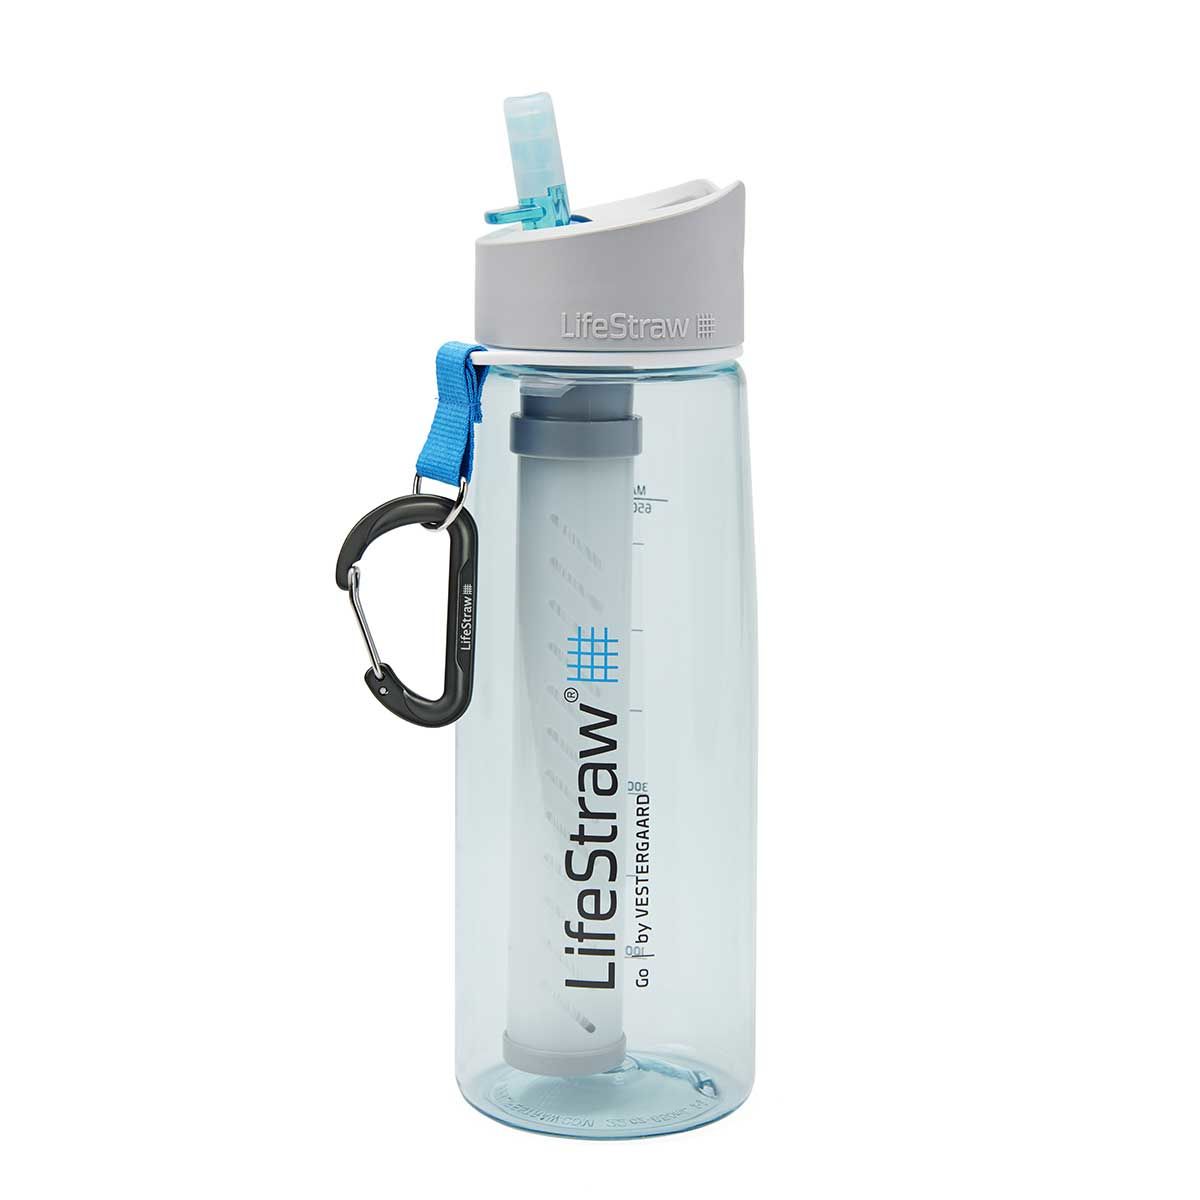 LifeStraw Go water filter bottle - Activated carbon filter - 0.65L